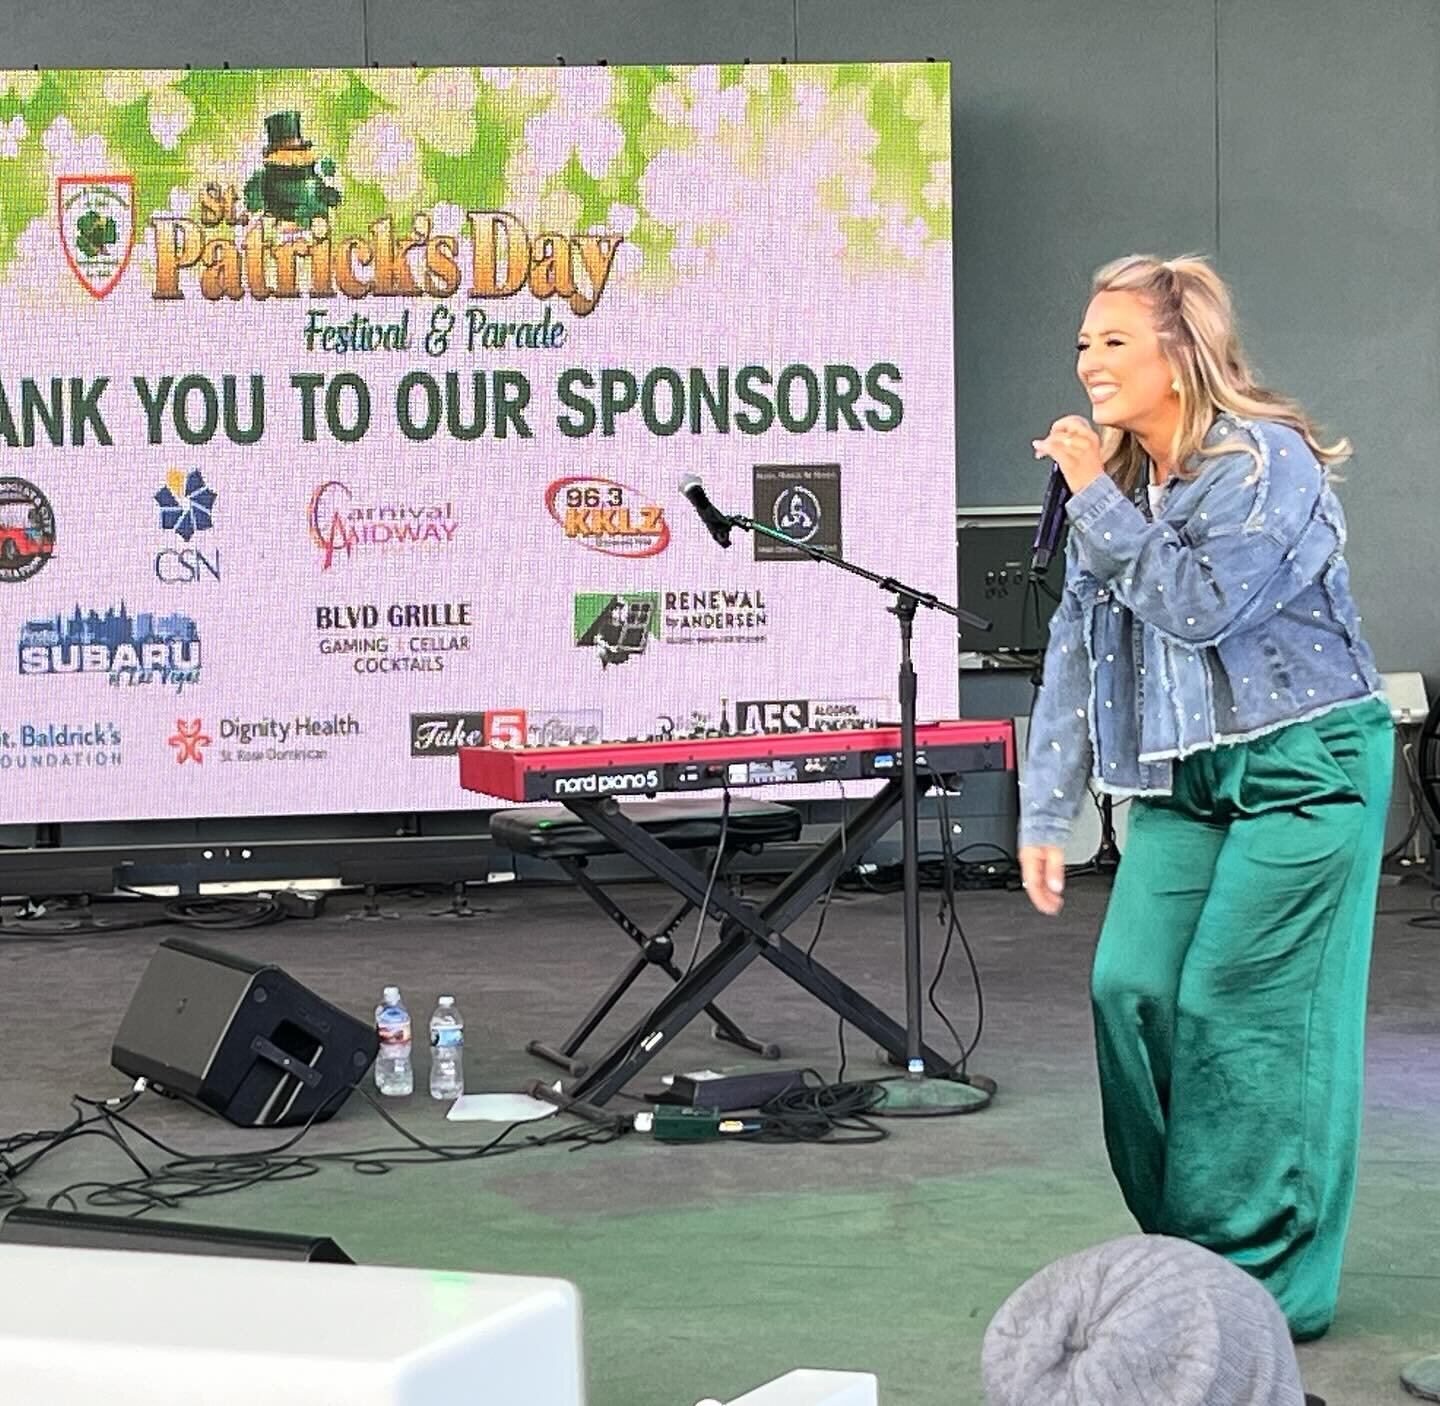 We loved having @chloeagnew perform TWICE at our 56th Annual St. Patrick&rsquo;s Day Festival &amp; Parade! ☘️ Thank you for sharing your amazing talent with us!